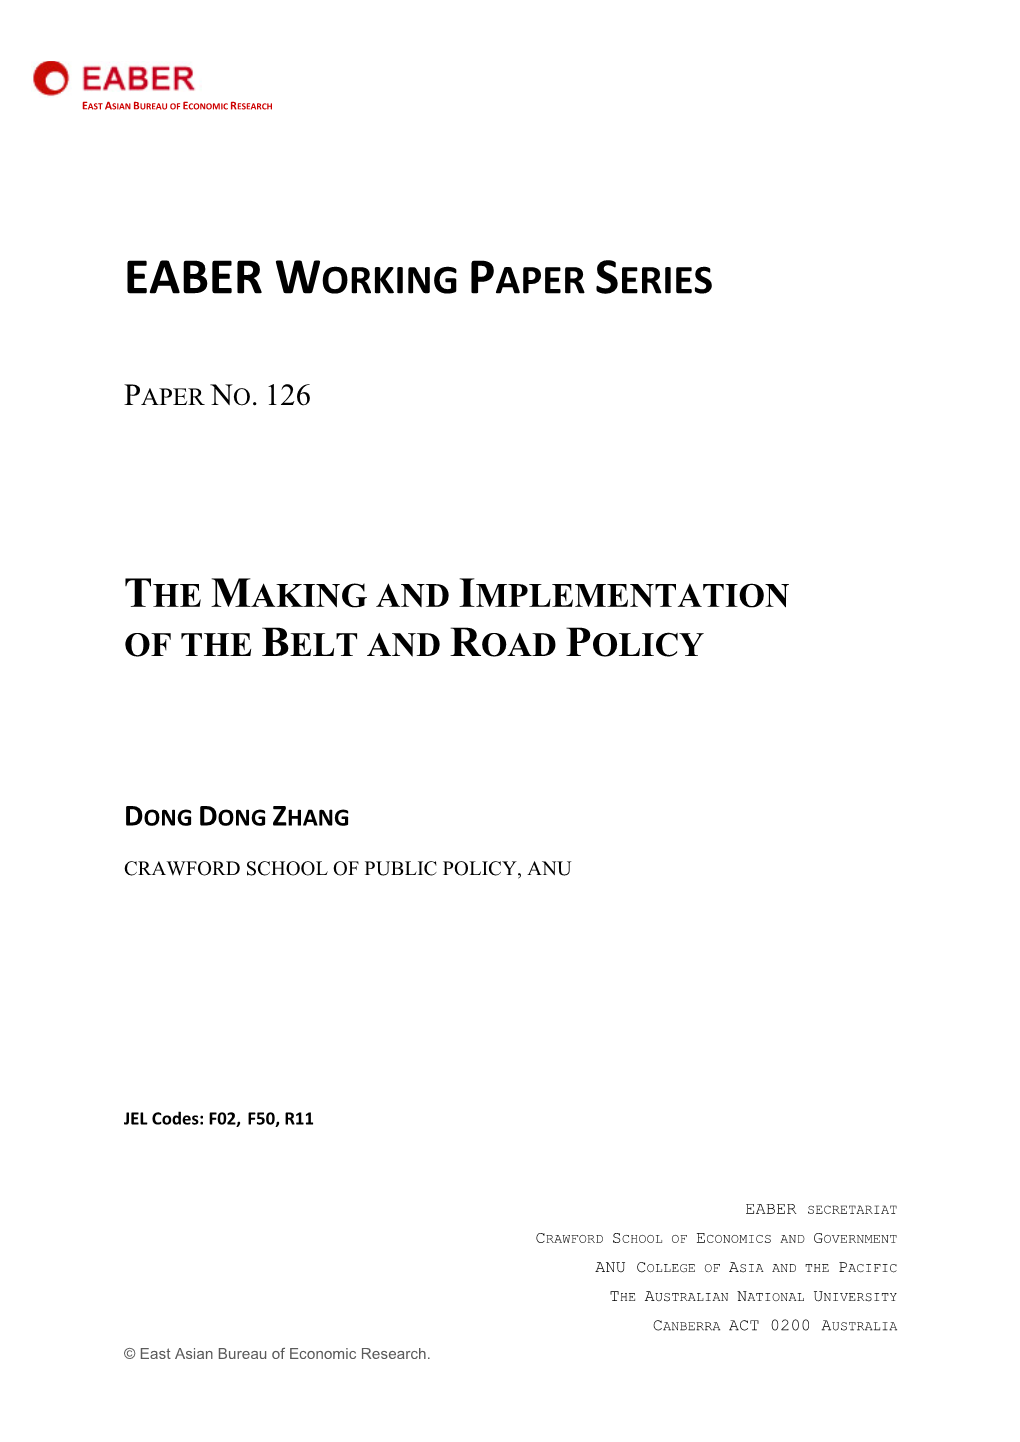 Eaber Working Paper Series